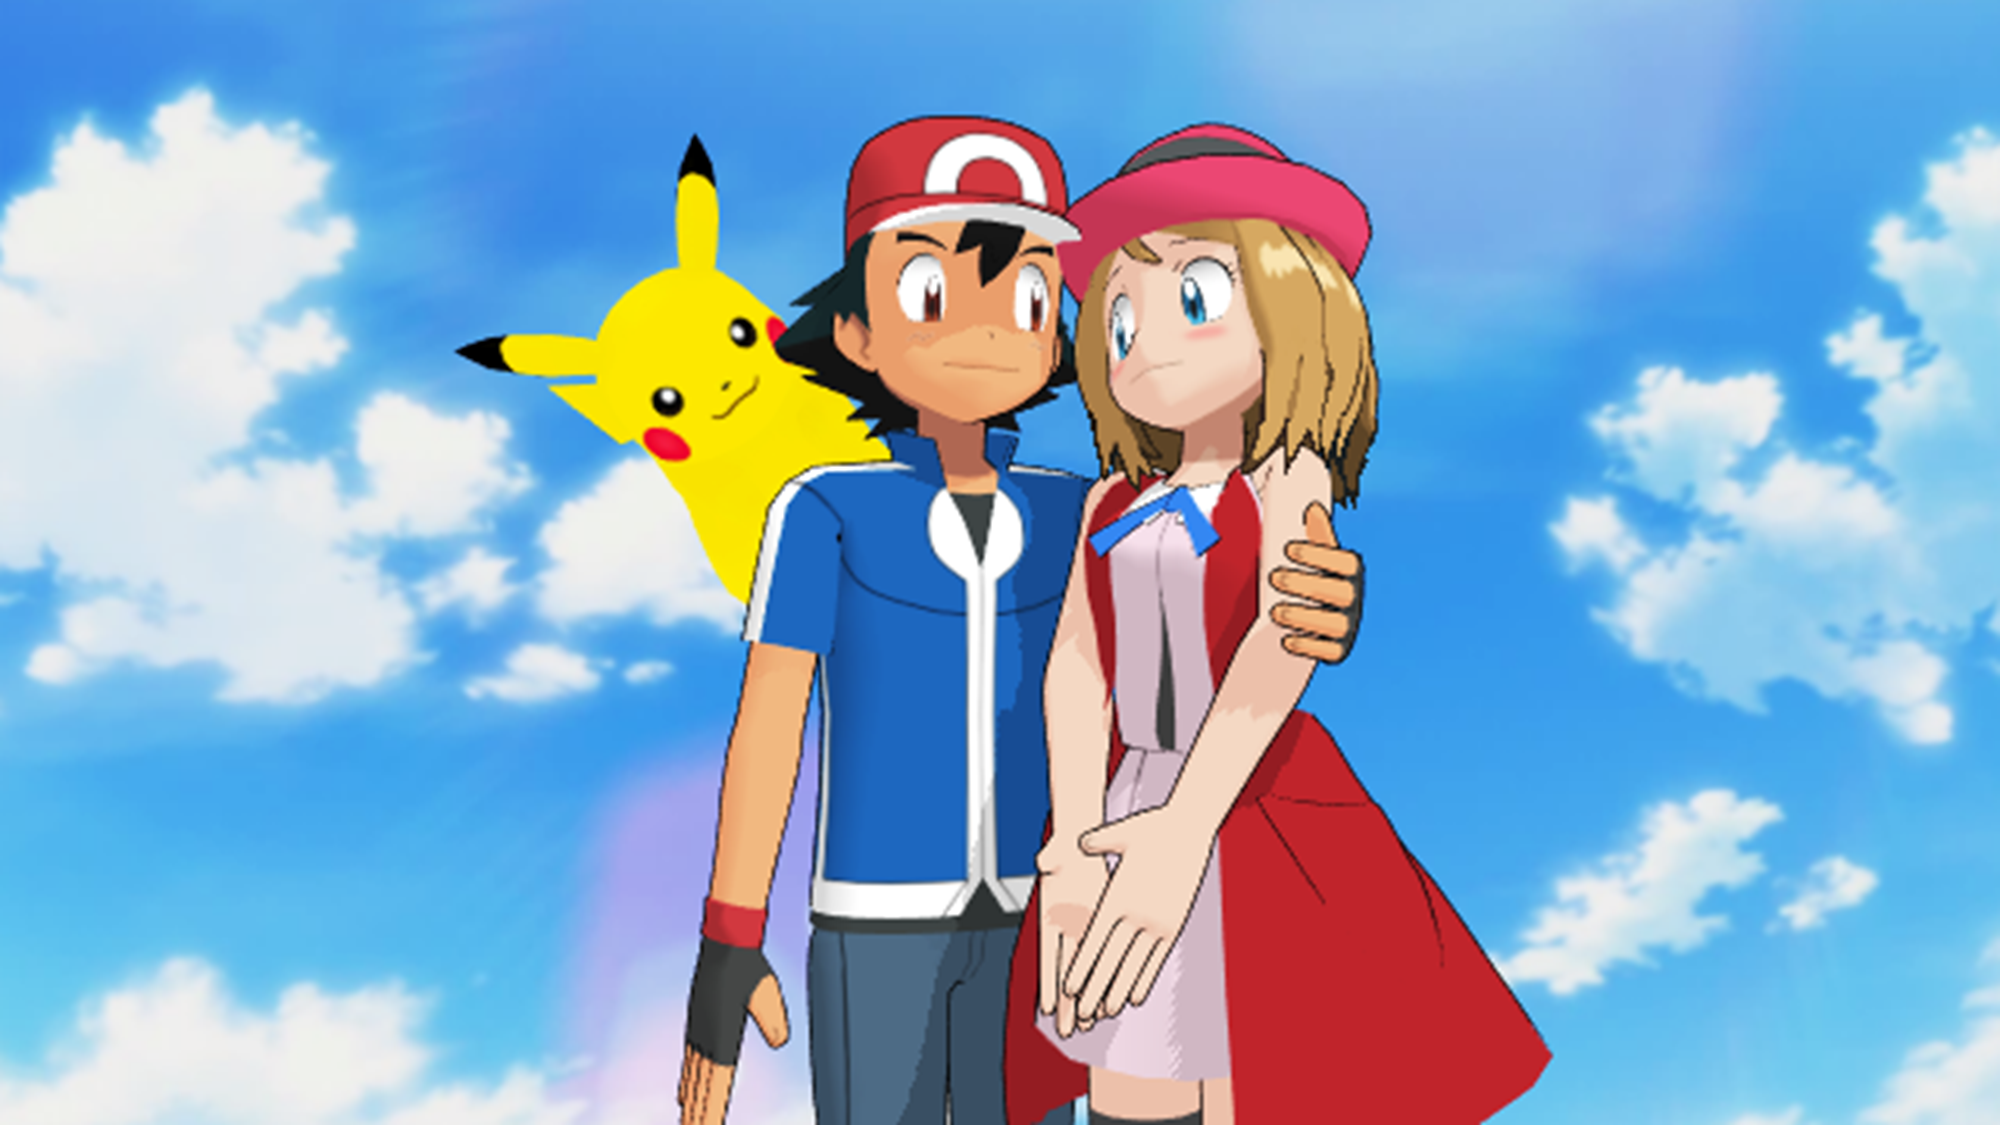 Ash Ketchum And Serena Are Together With Pikachu Pokemon - Ash And Pikachu Wallpaper Iphone - HD Wallpaper 